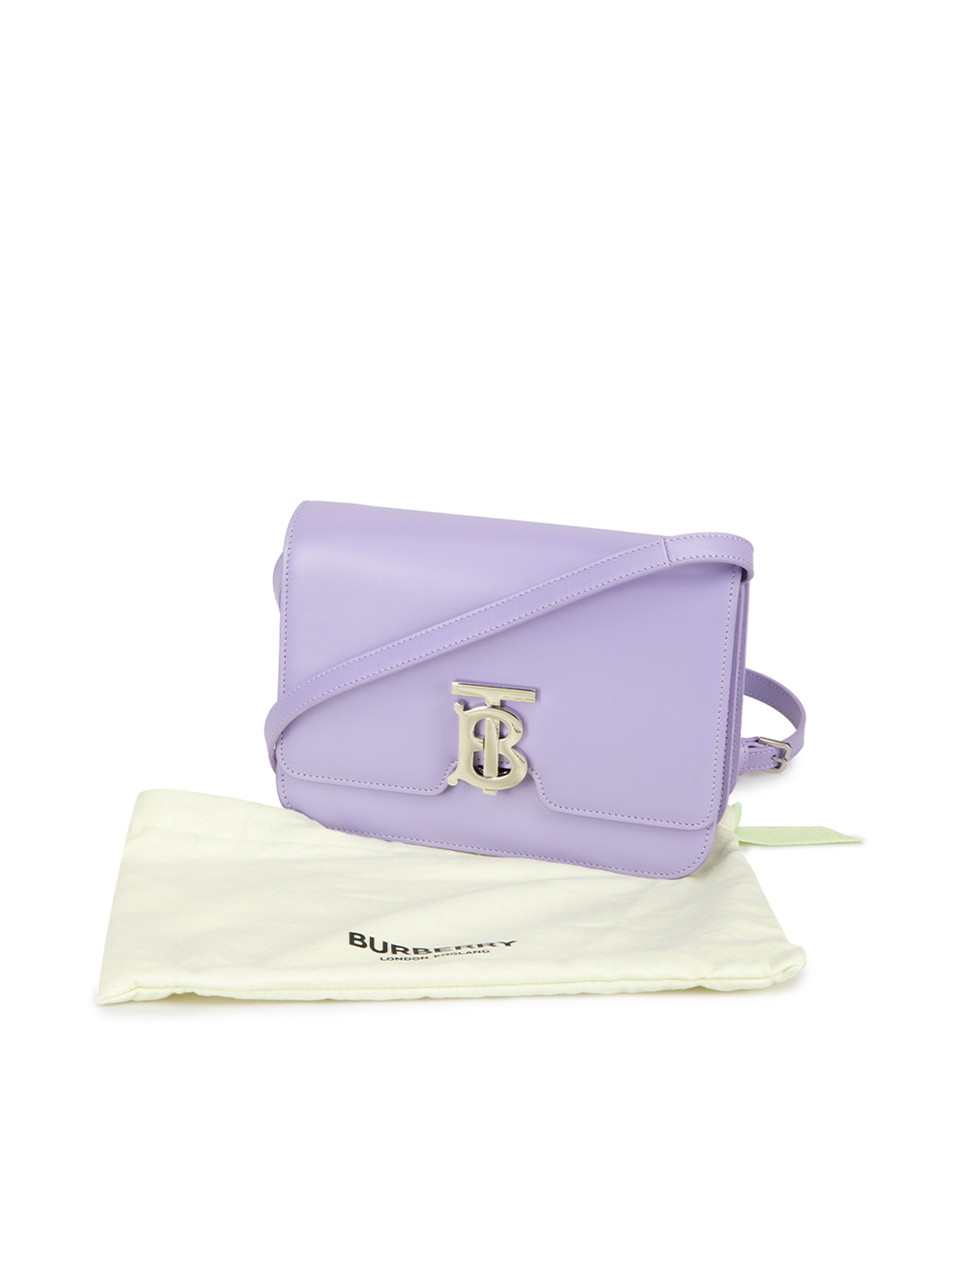 Burberry Lilac Leather Small TB Bag